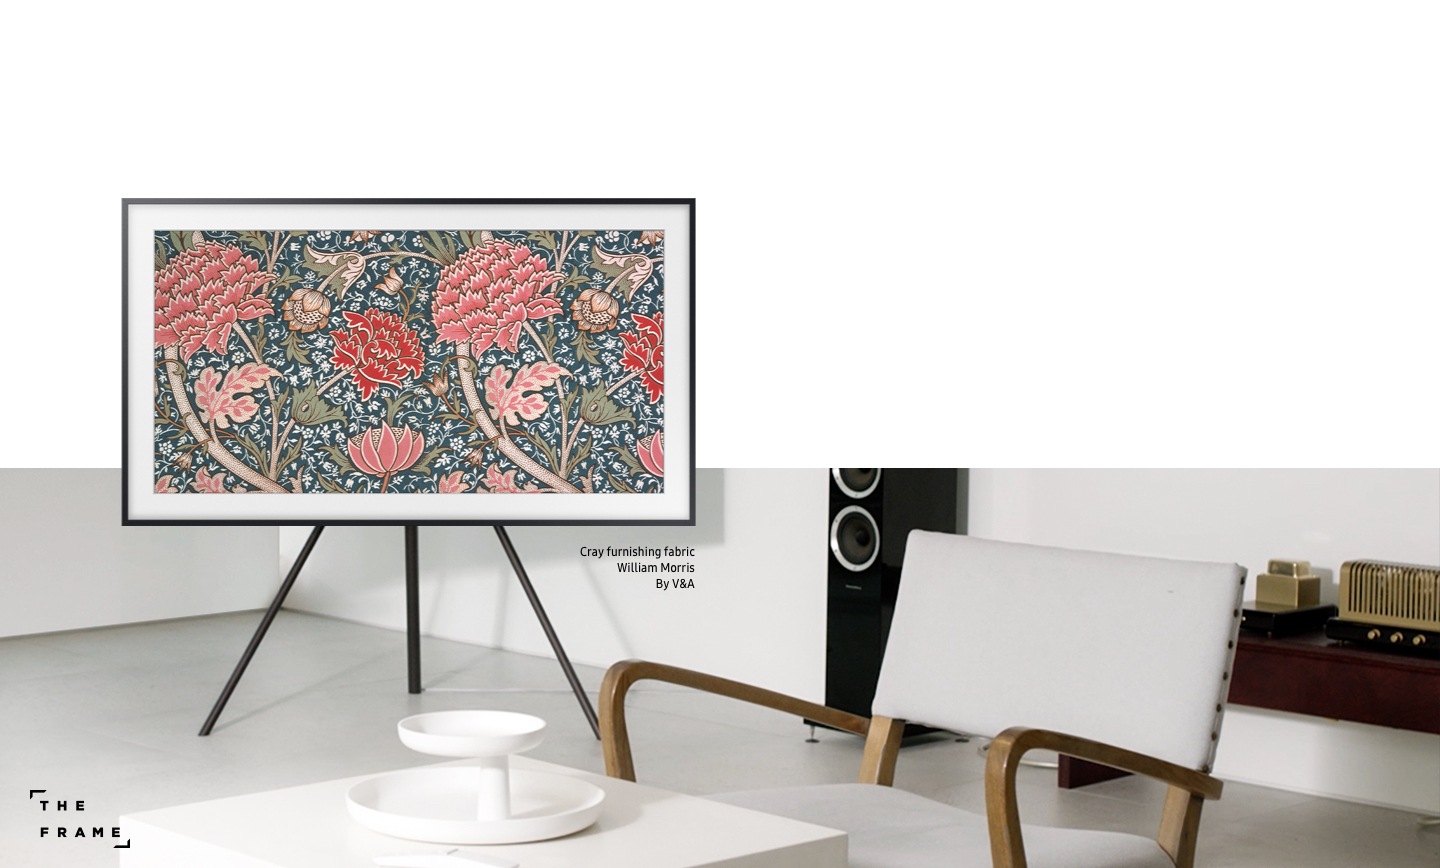 Samsung The frame tv is displaying art work of Cray furnishing fabric by William Morris, V&A. Frame tv makes every space more aesthetically, and can play a variety roles wherever it is placed.